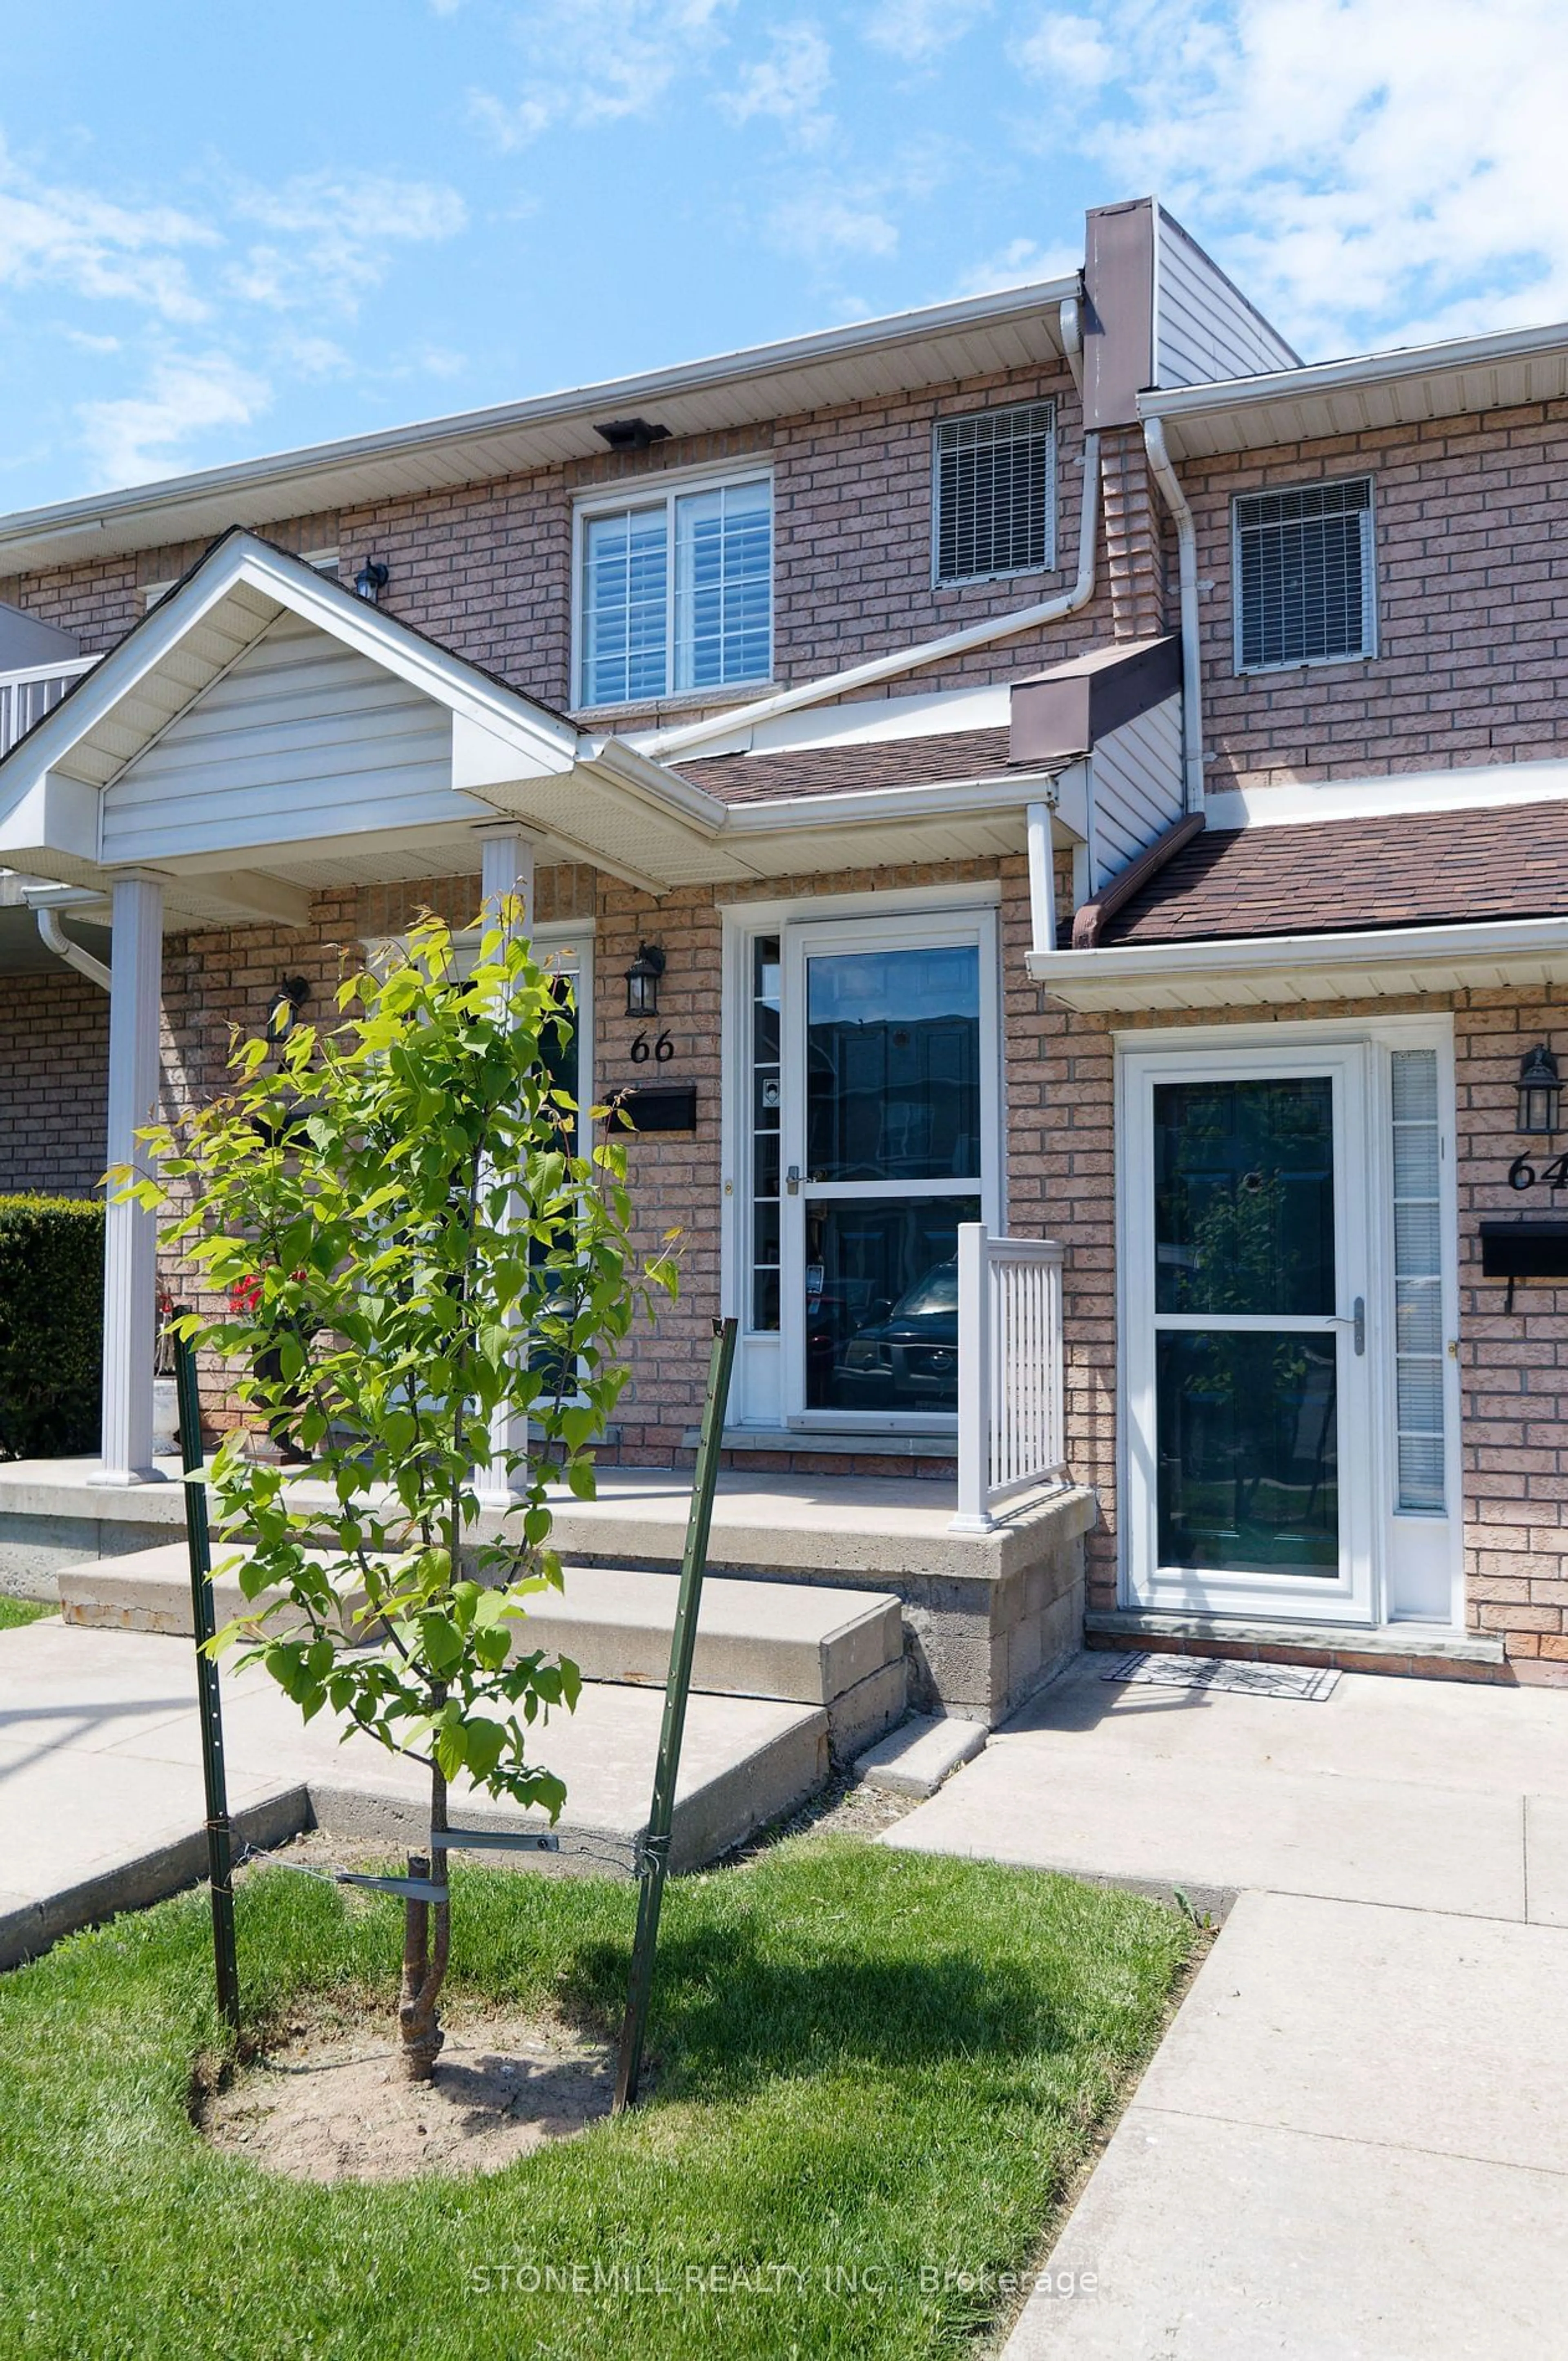 Home with brick exterior material for 2737 King St #66, Hamilton Ontario L8G 5H1